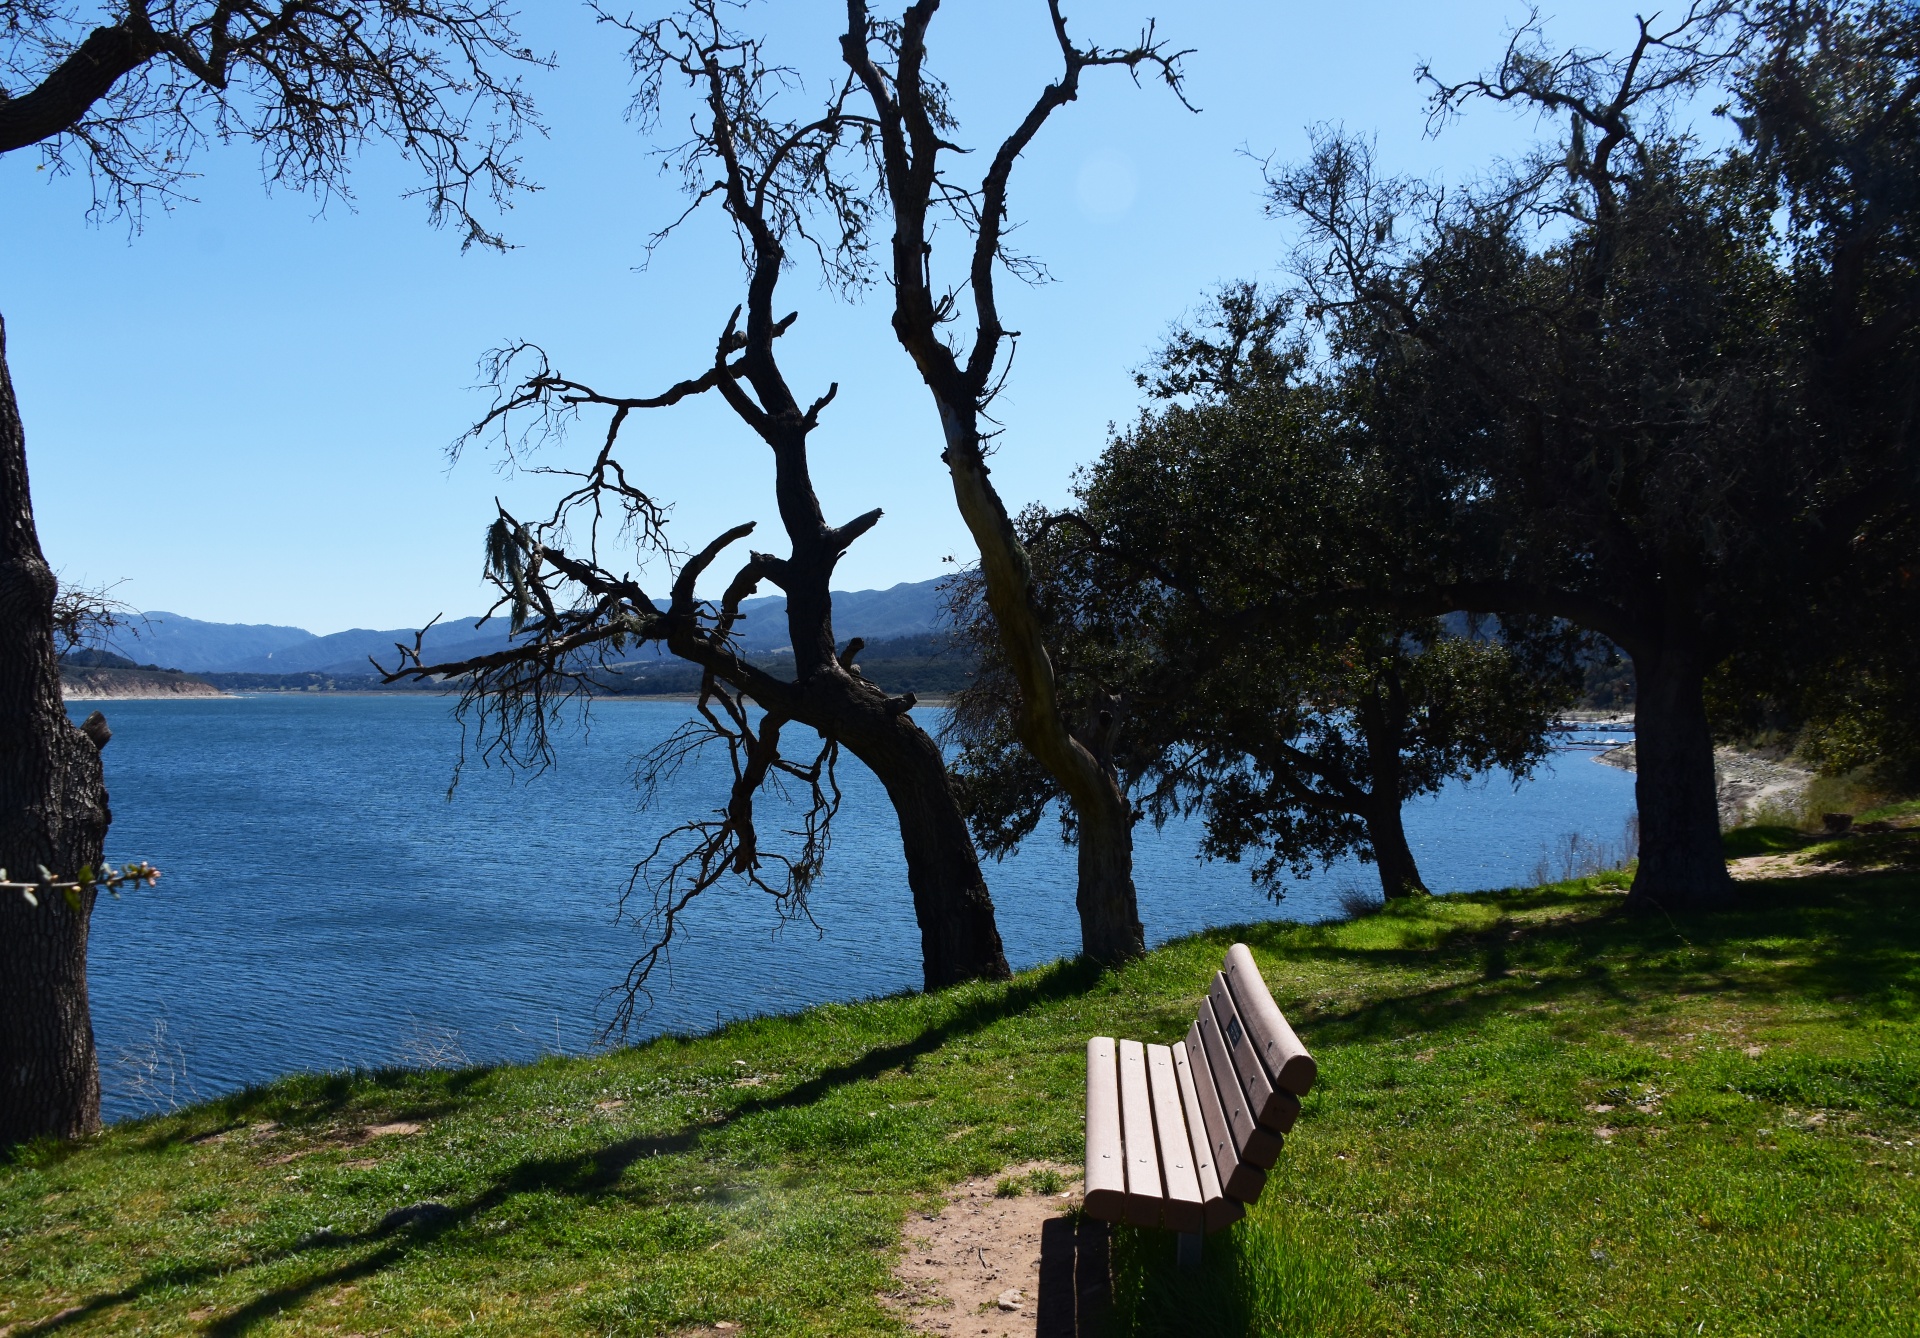 a bench sits on the grassy green shores of the large lake reservoir of Lake Cachuma